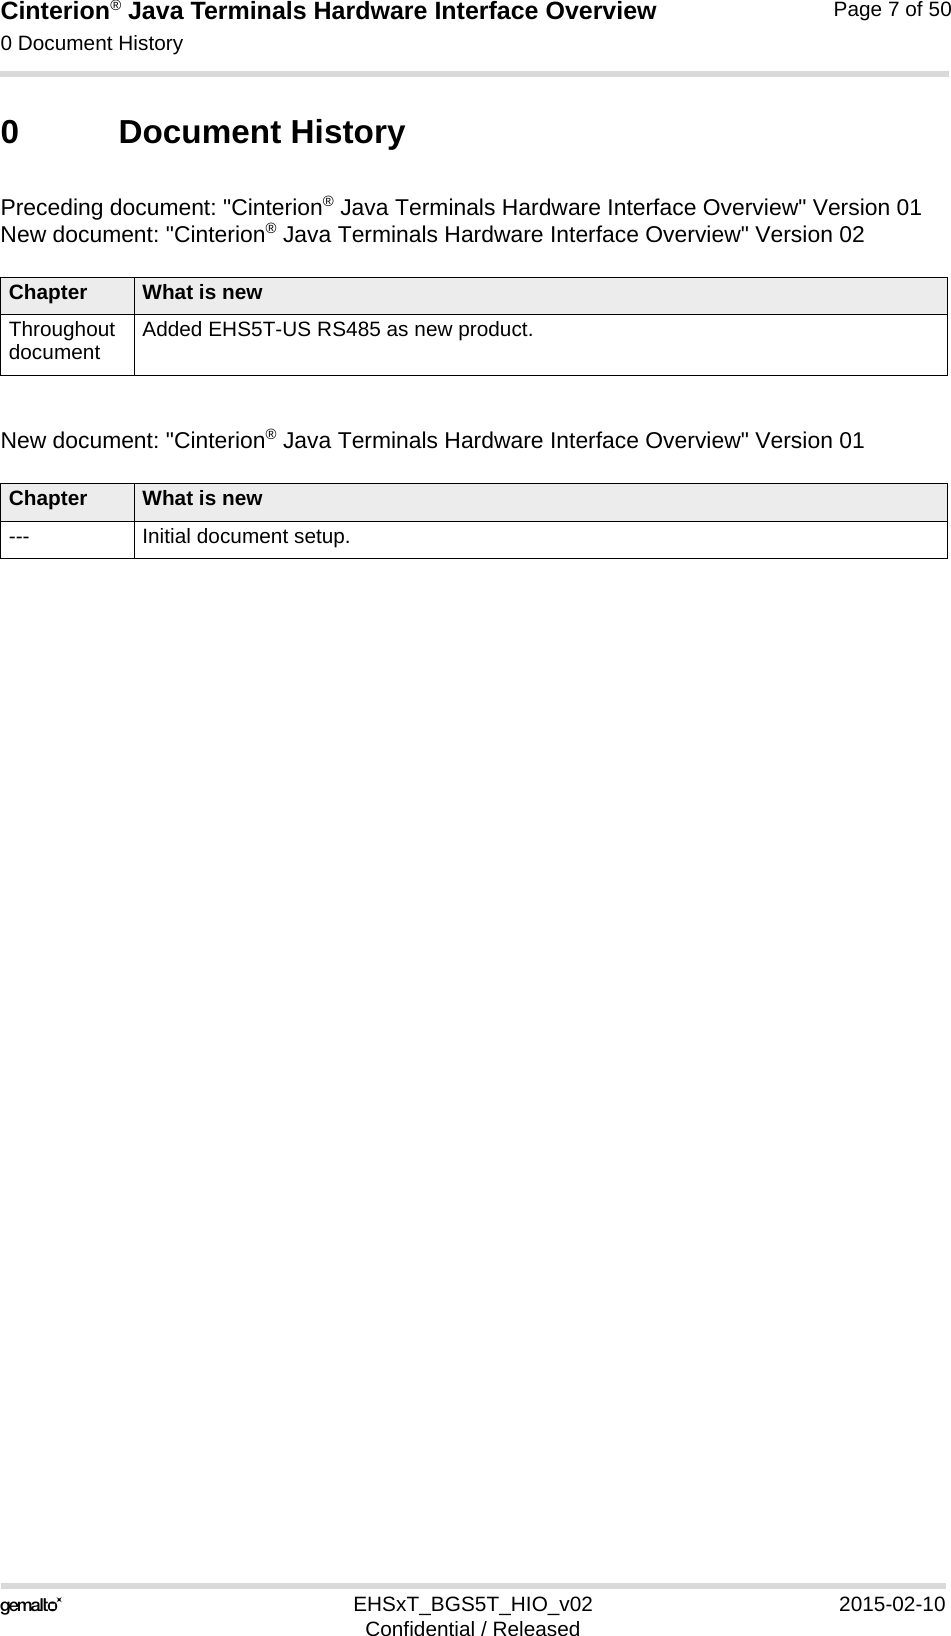 Cinterion® Java Terminals Hardware Interface Overview0 Document History7EHSxT_BGS5T_HIO_v02 2015-02-10Confidential / ReleasedPage 7 of 500 Document HistoryPreceding document: &quot;Cinterion® Java Terminals Hardware Interface Overview&quot; Version 01New document: &quot;Cinterion® Java Terminals Hardware Interface Overview&quot; Version 02New document: &quot;Cinterion® Java Terminals Hardware Interface Overview&quot; Version 01Chapter What is newThroughout document Added EHS5T-US RS485 as new product.Chapter What is new--- Initial document setup.